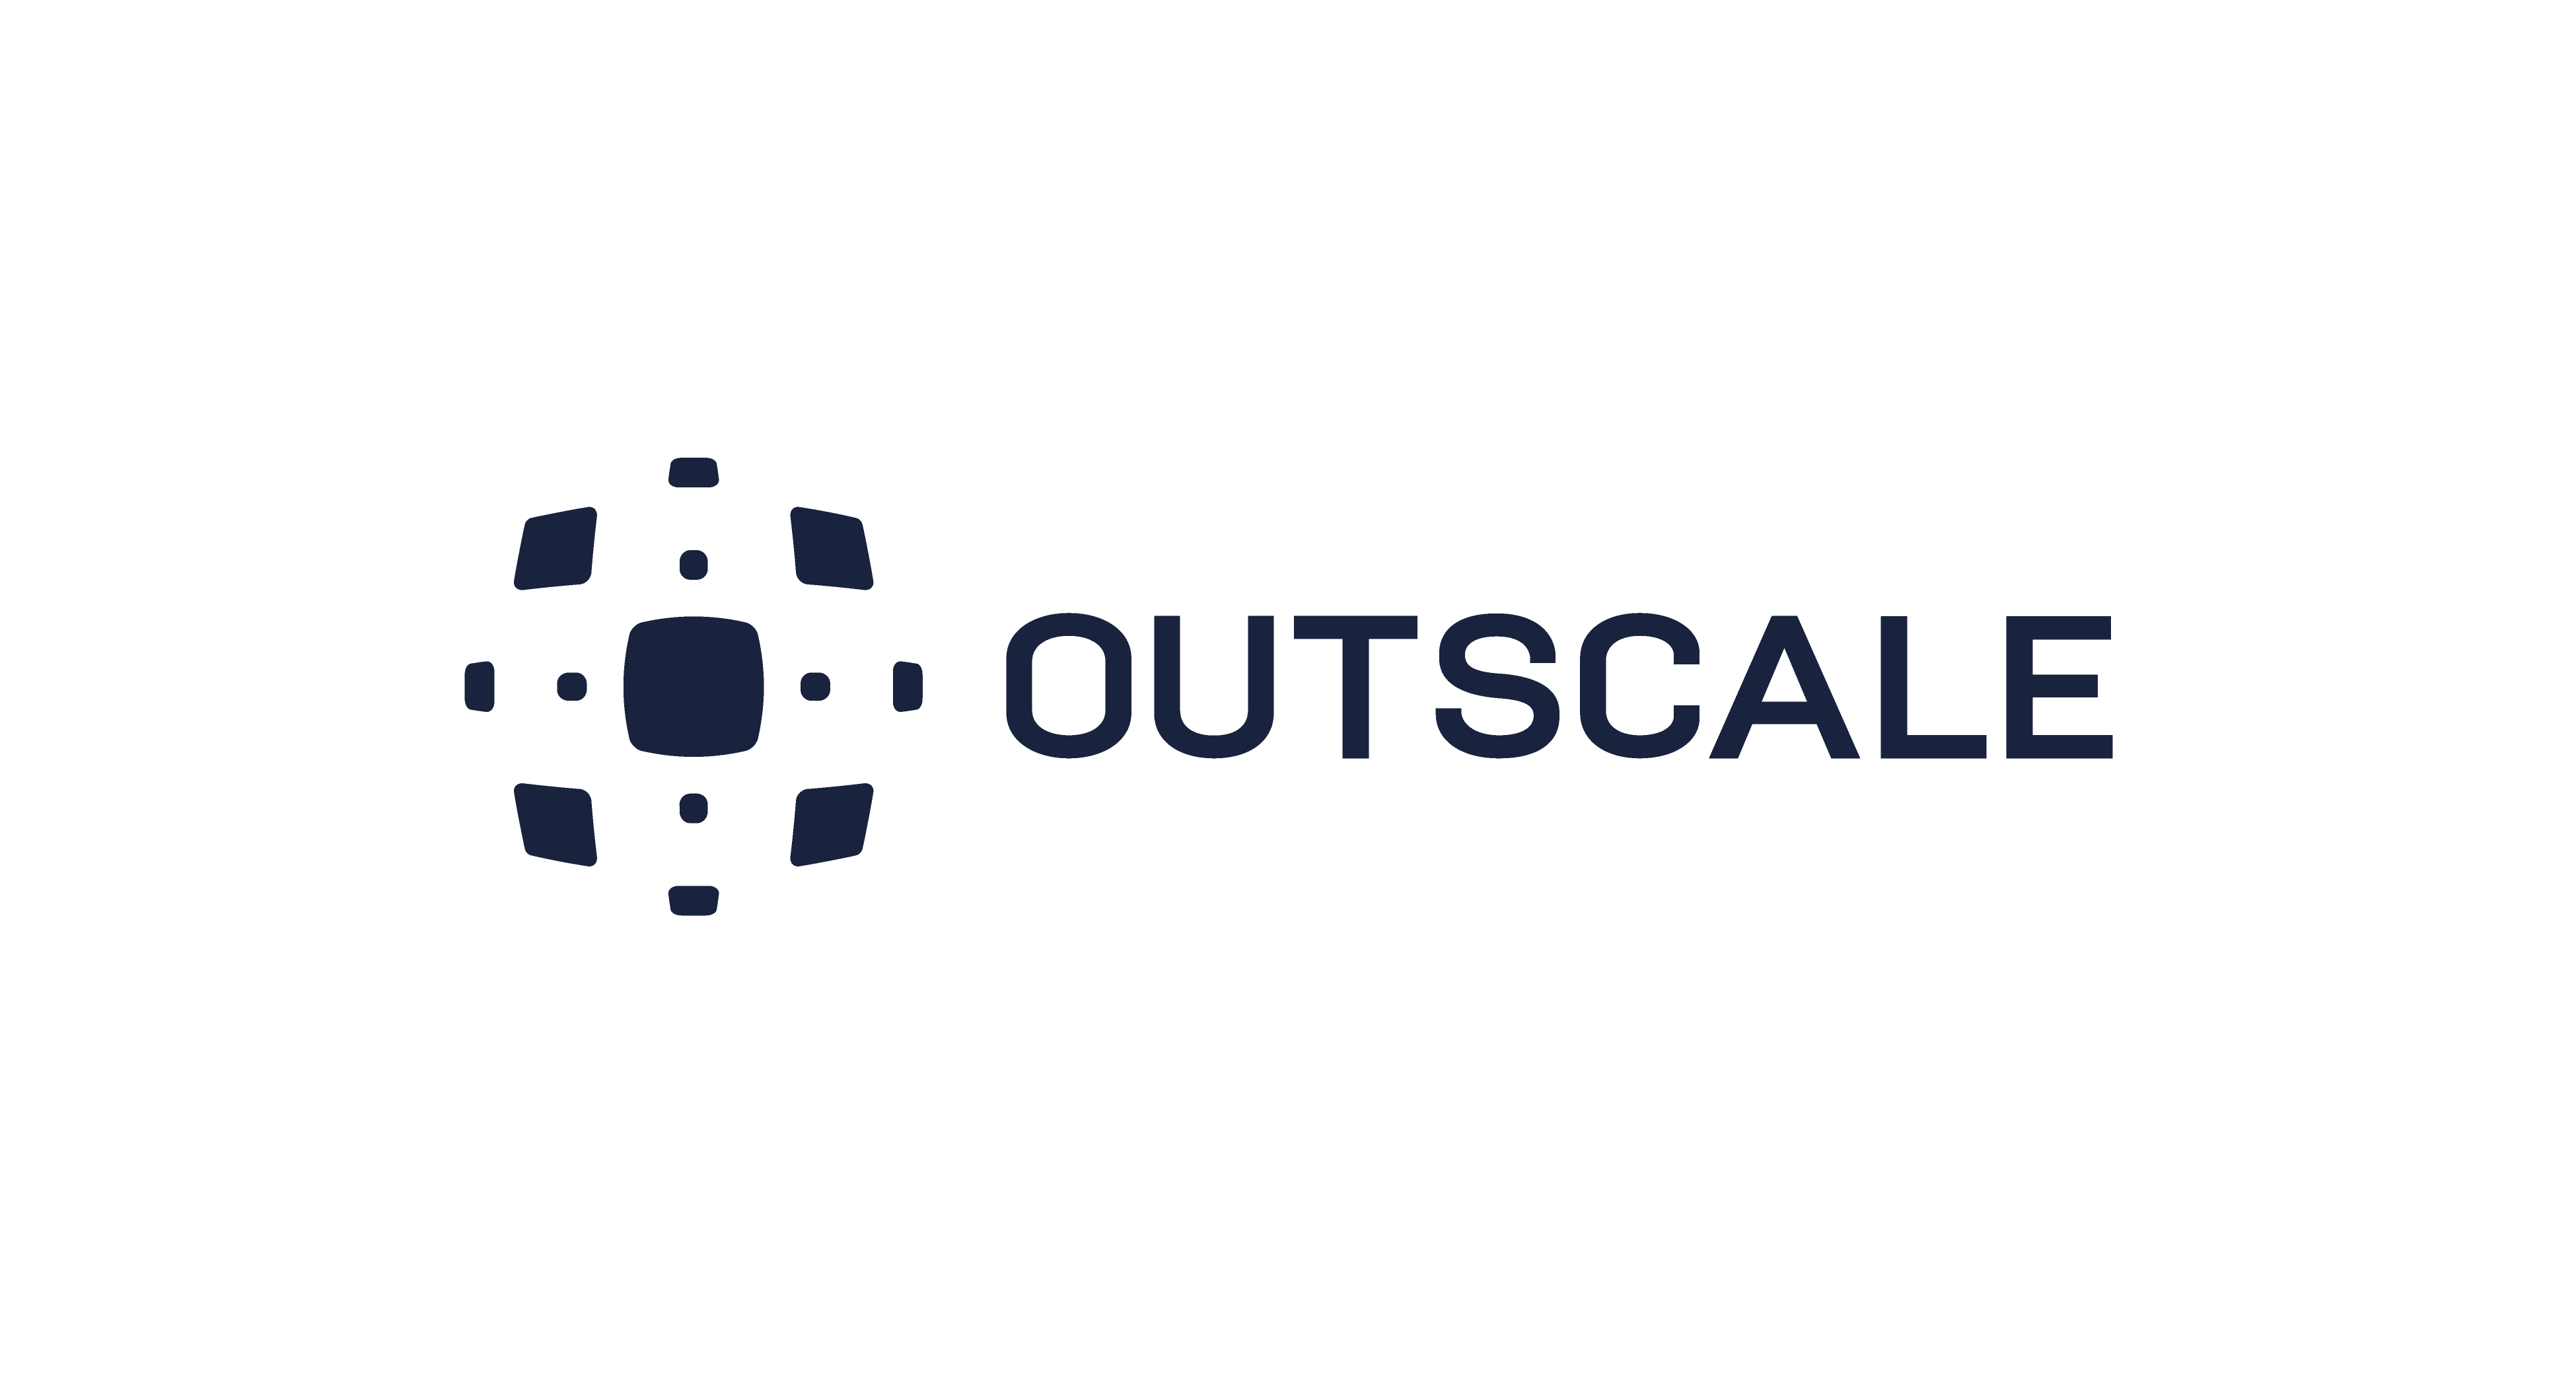 World First: Outscale Unveils Per-Second Billing to Boost Cloud Adoption